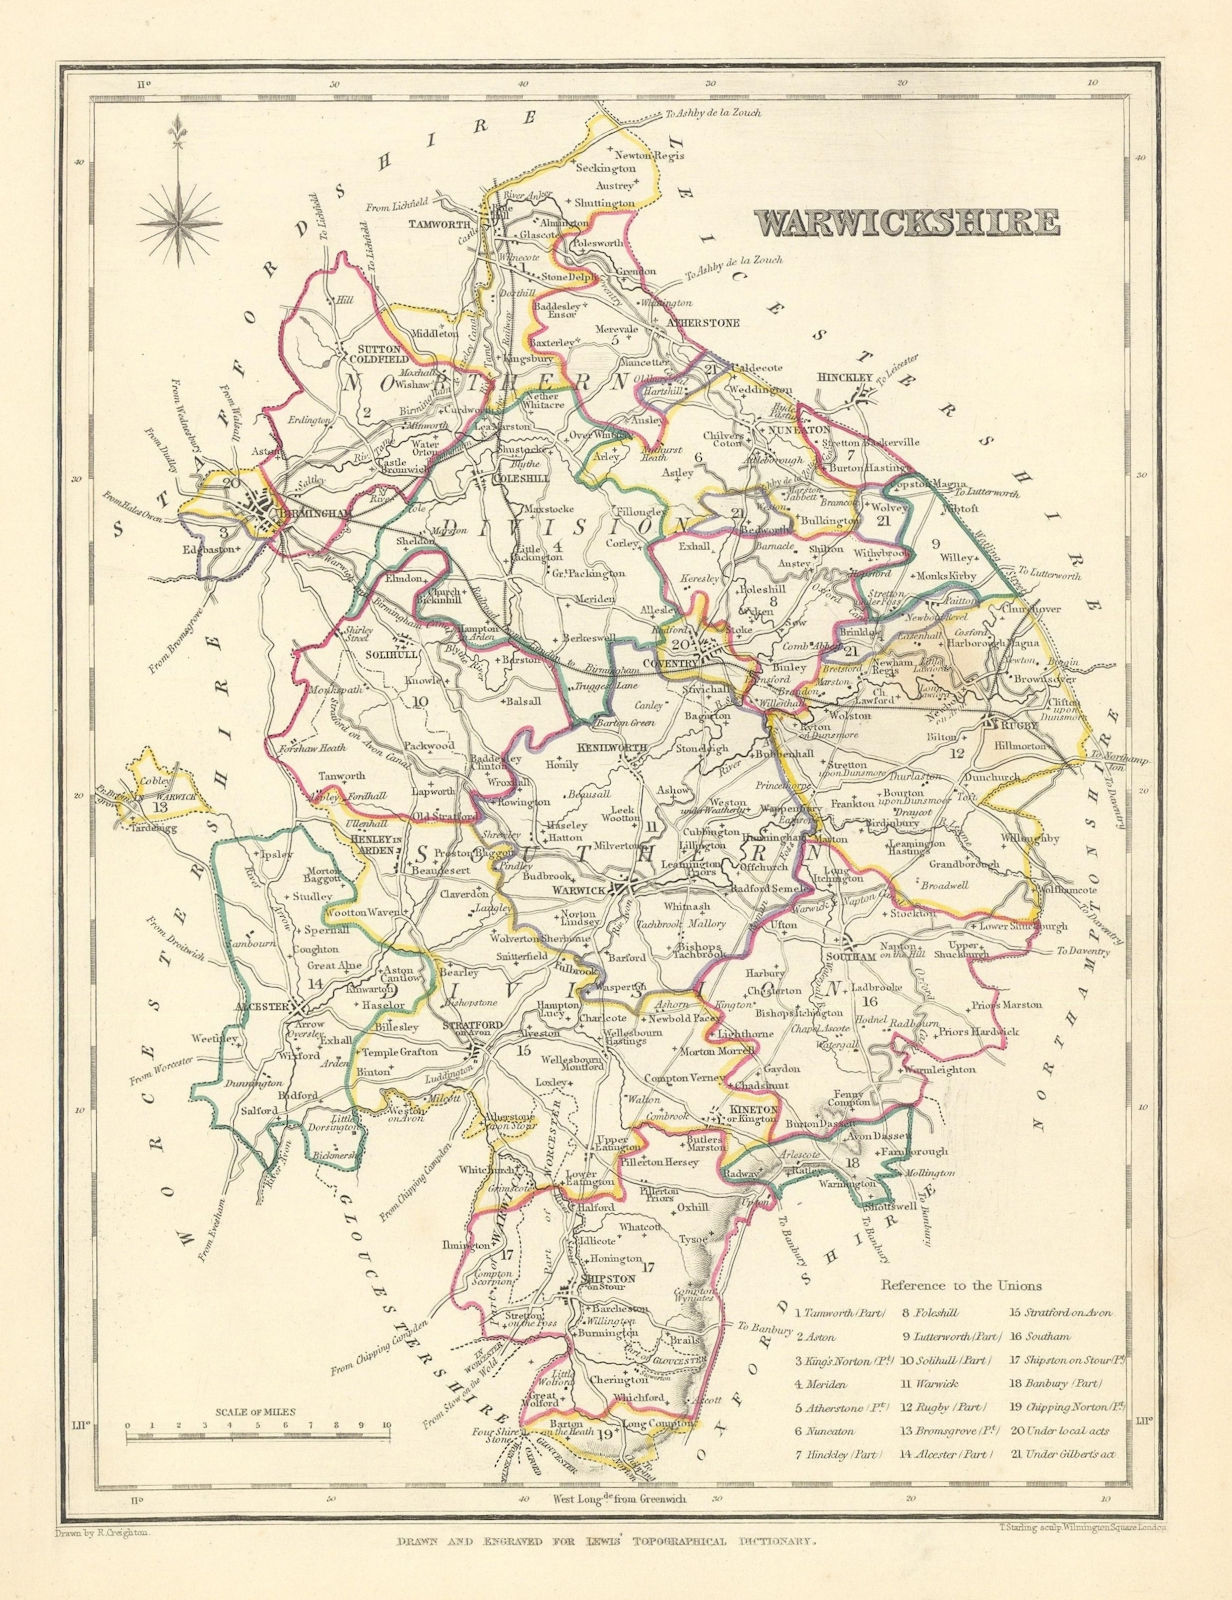 Associate Product Antique county map of WARWICKSHIRE by Creighton & Starling for Lewis c1840